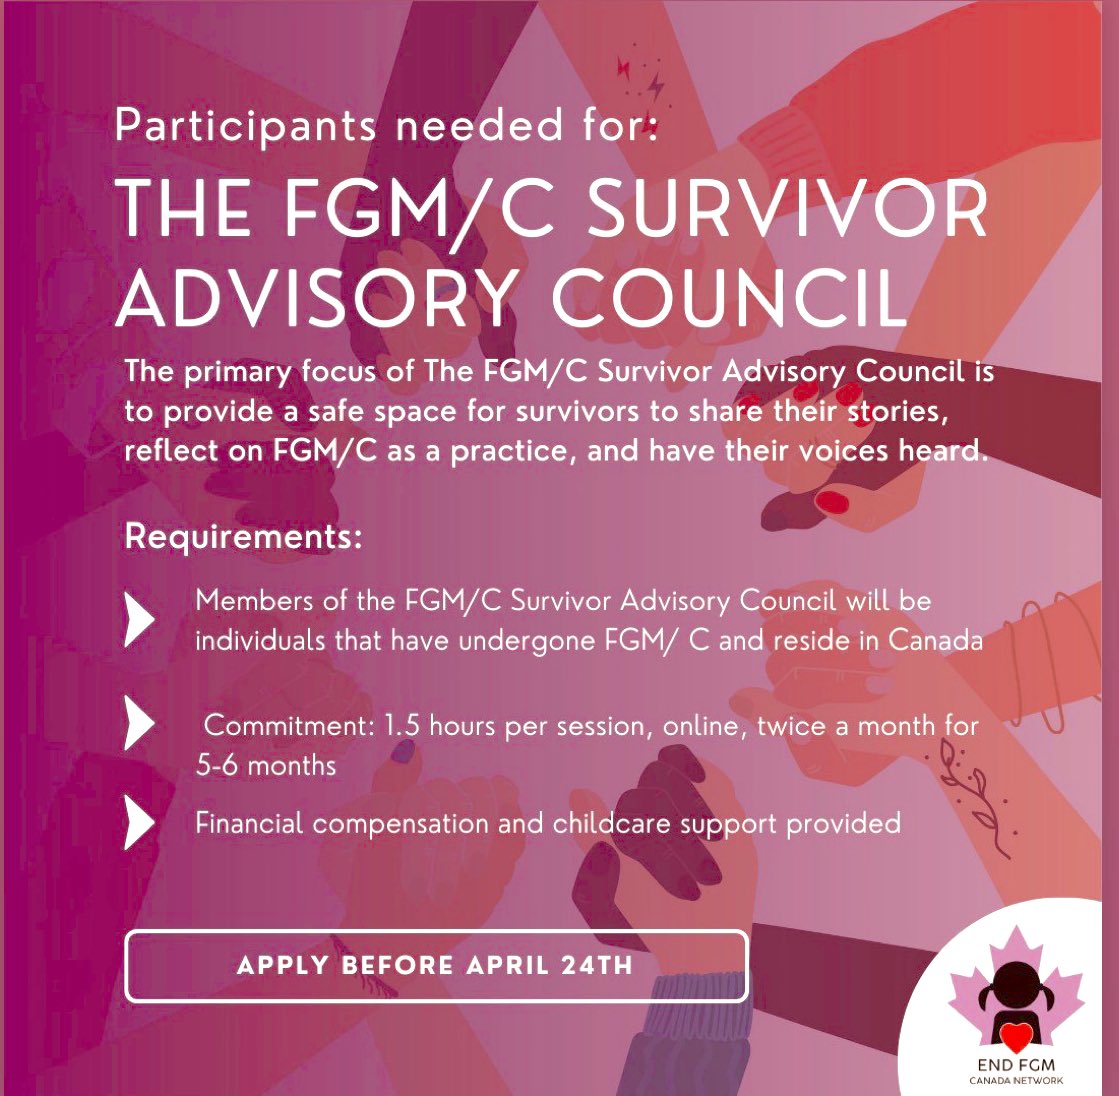 Please help spread the word?📣 I’ll be facilitating these sessions and we still have space for a few participants. Details: -1.5 hrs/session, online, 2x/mos for 5-6 mos -financial compensation & childcare support -apply by APRIL 24 endfgm.ca/survivor-advis… @endfgmcanada